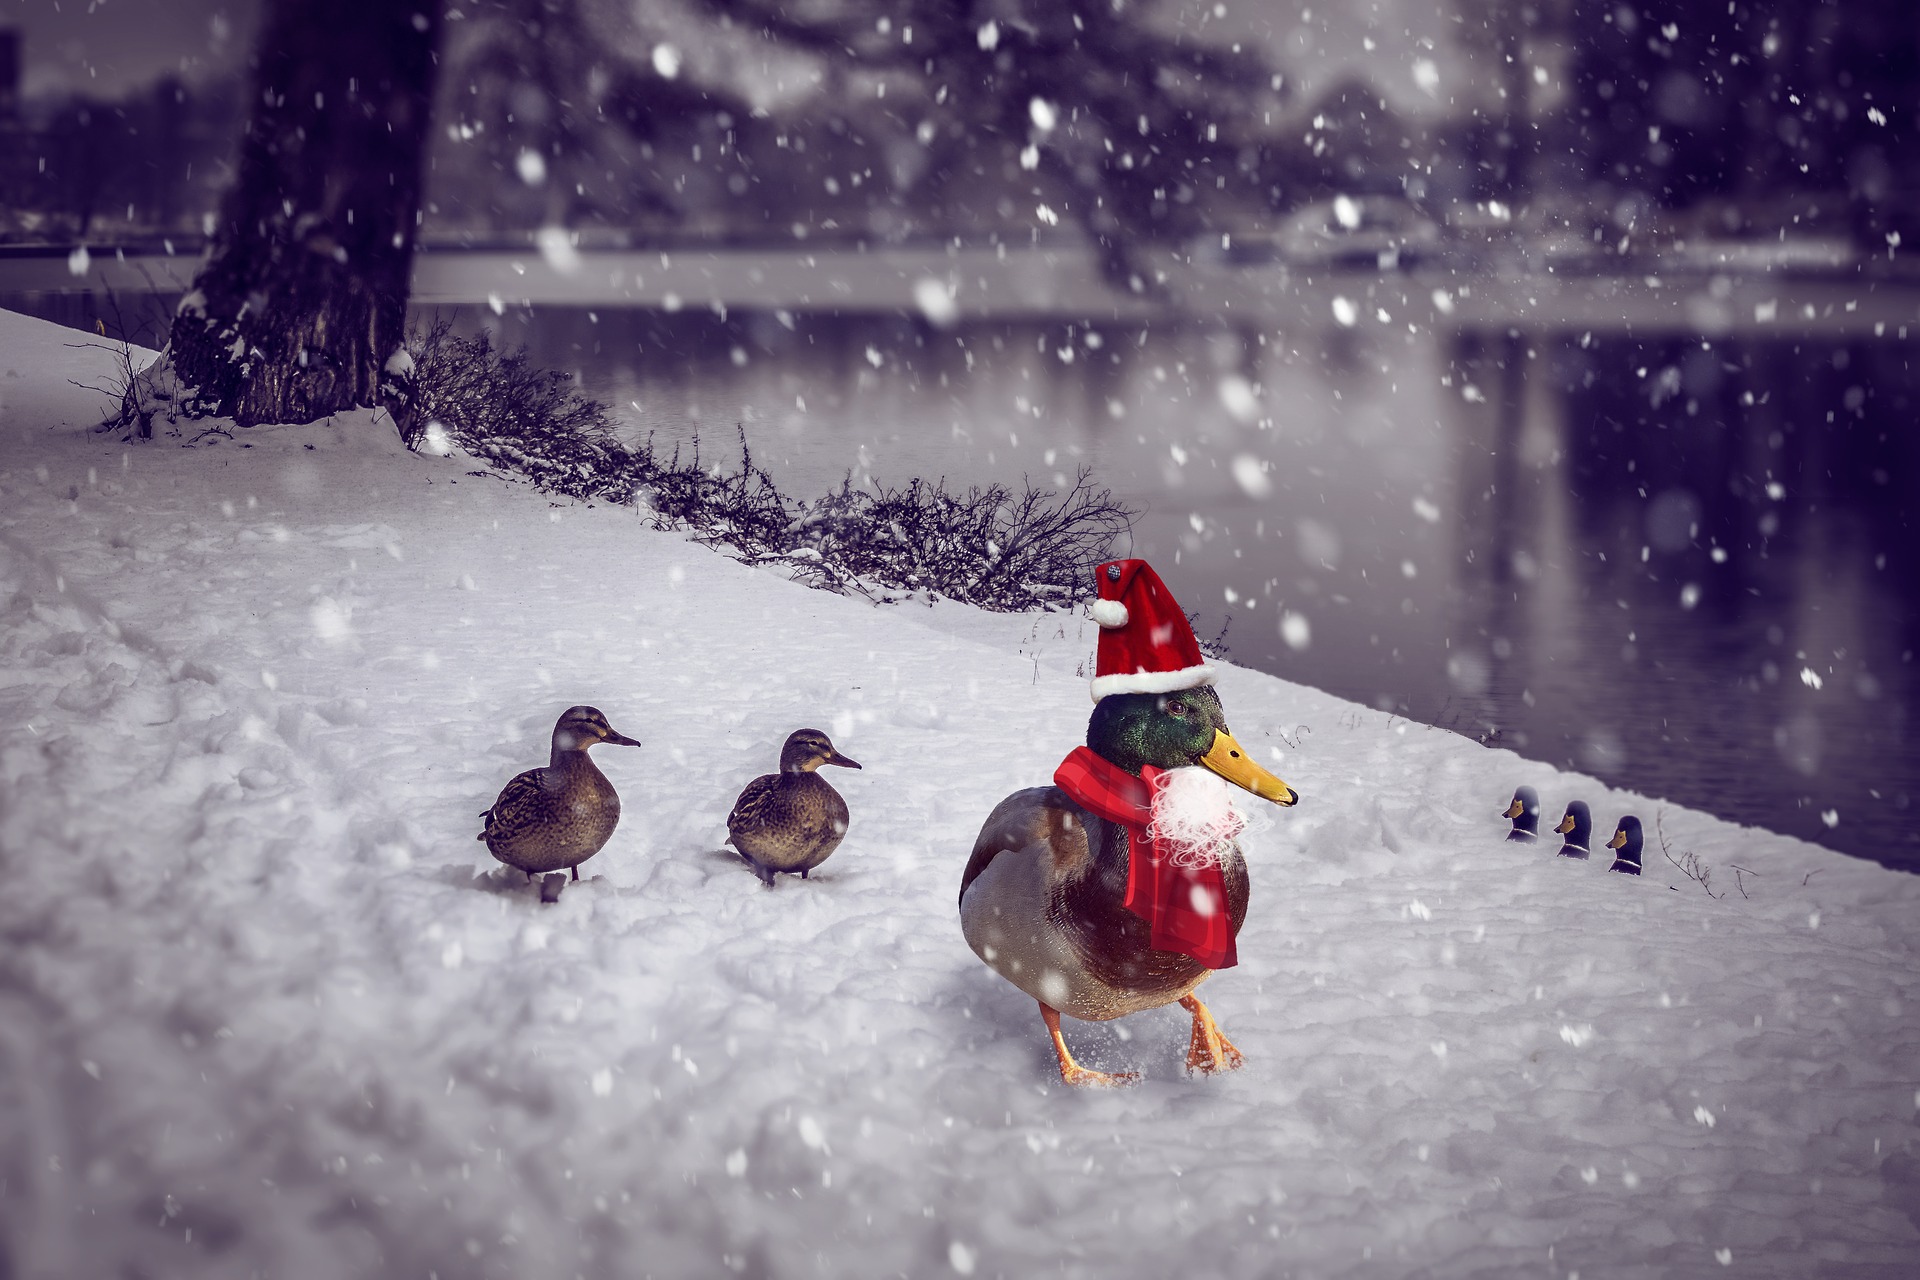 Ducks in snow, leader drake with Christmas hat and scarf